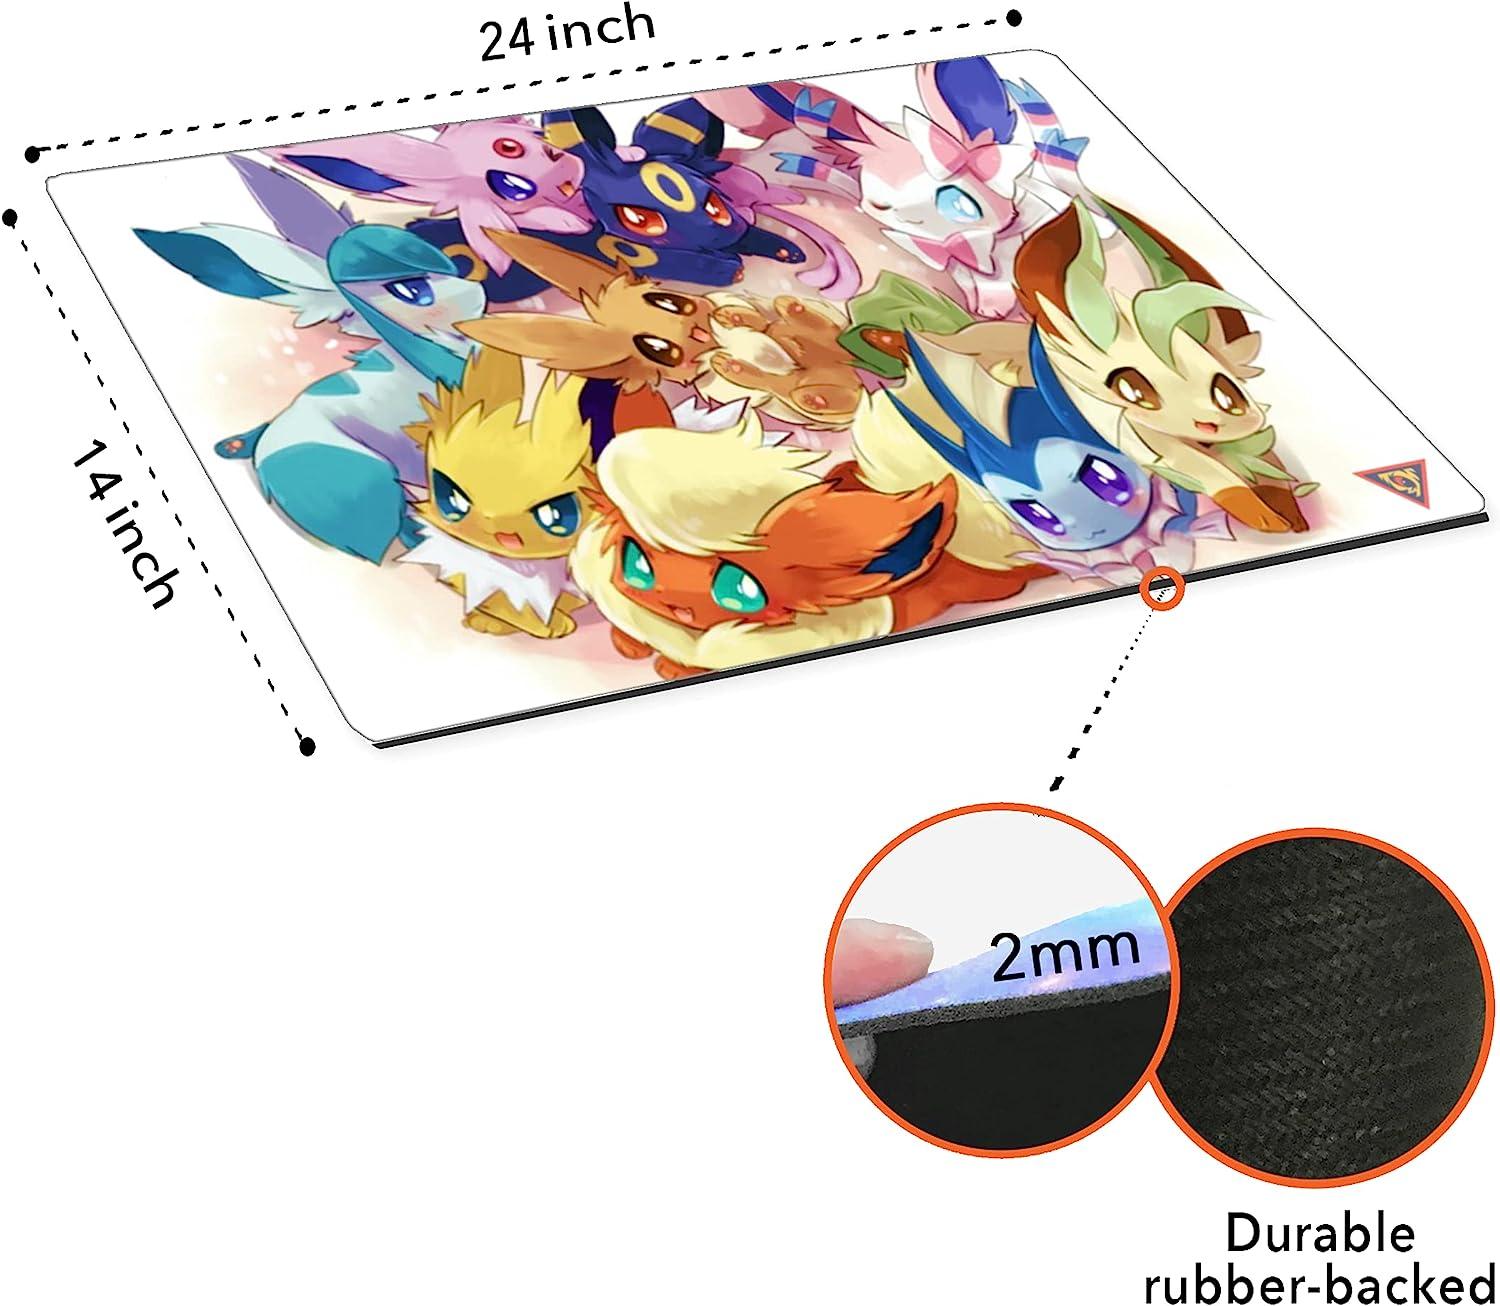 Eeveelutions Board Game Playmat for Trading Cards Games Mouse Pad